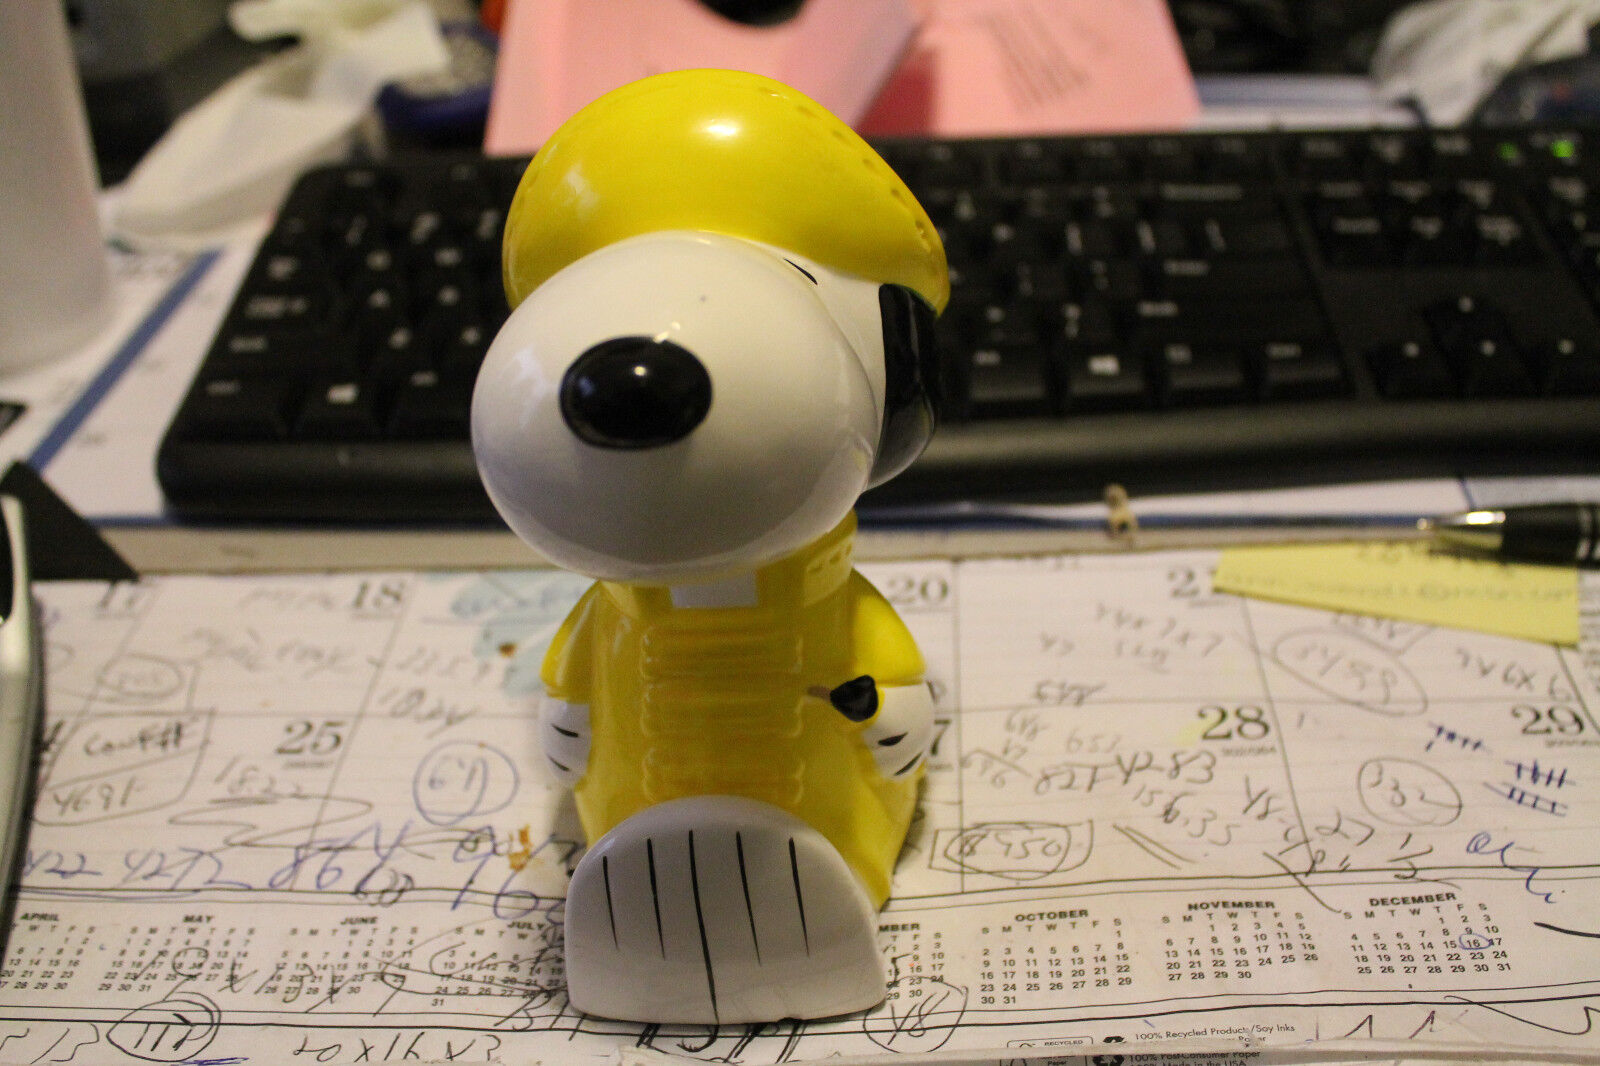 SNOOPY 1958 1966 UNITED FEATURE SYNDICATE IN YELLOW RAIN GEAR